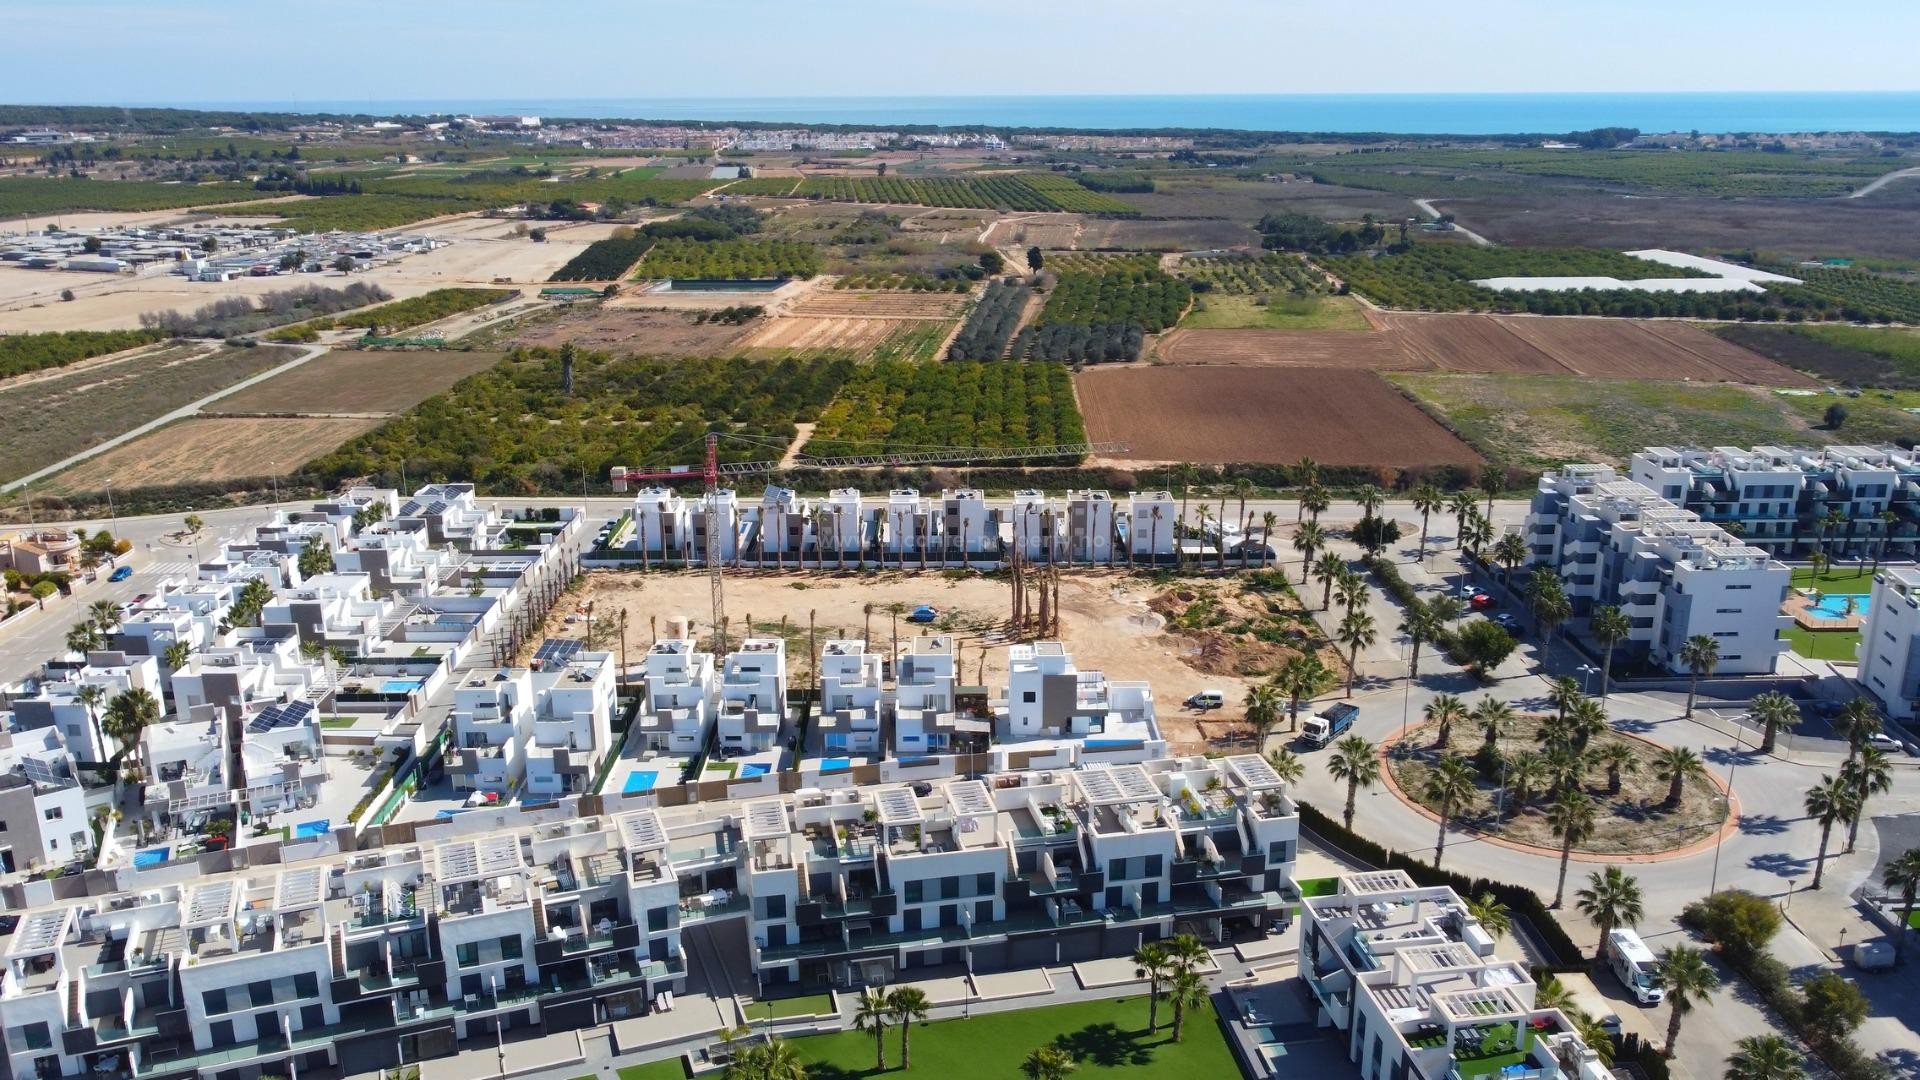 New homes in El Raso, Guardamar del Segura, 2/3 bedrooms, 2 bathrooms, large communal salt water pool, park area with citrus gardens and salt lakes, close to golf course